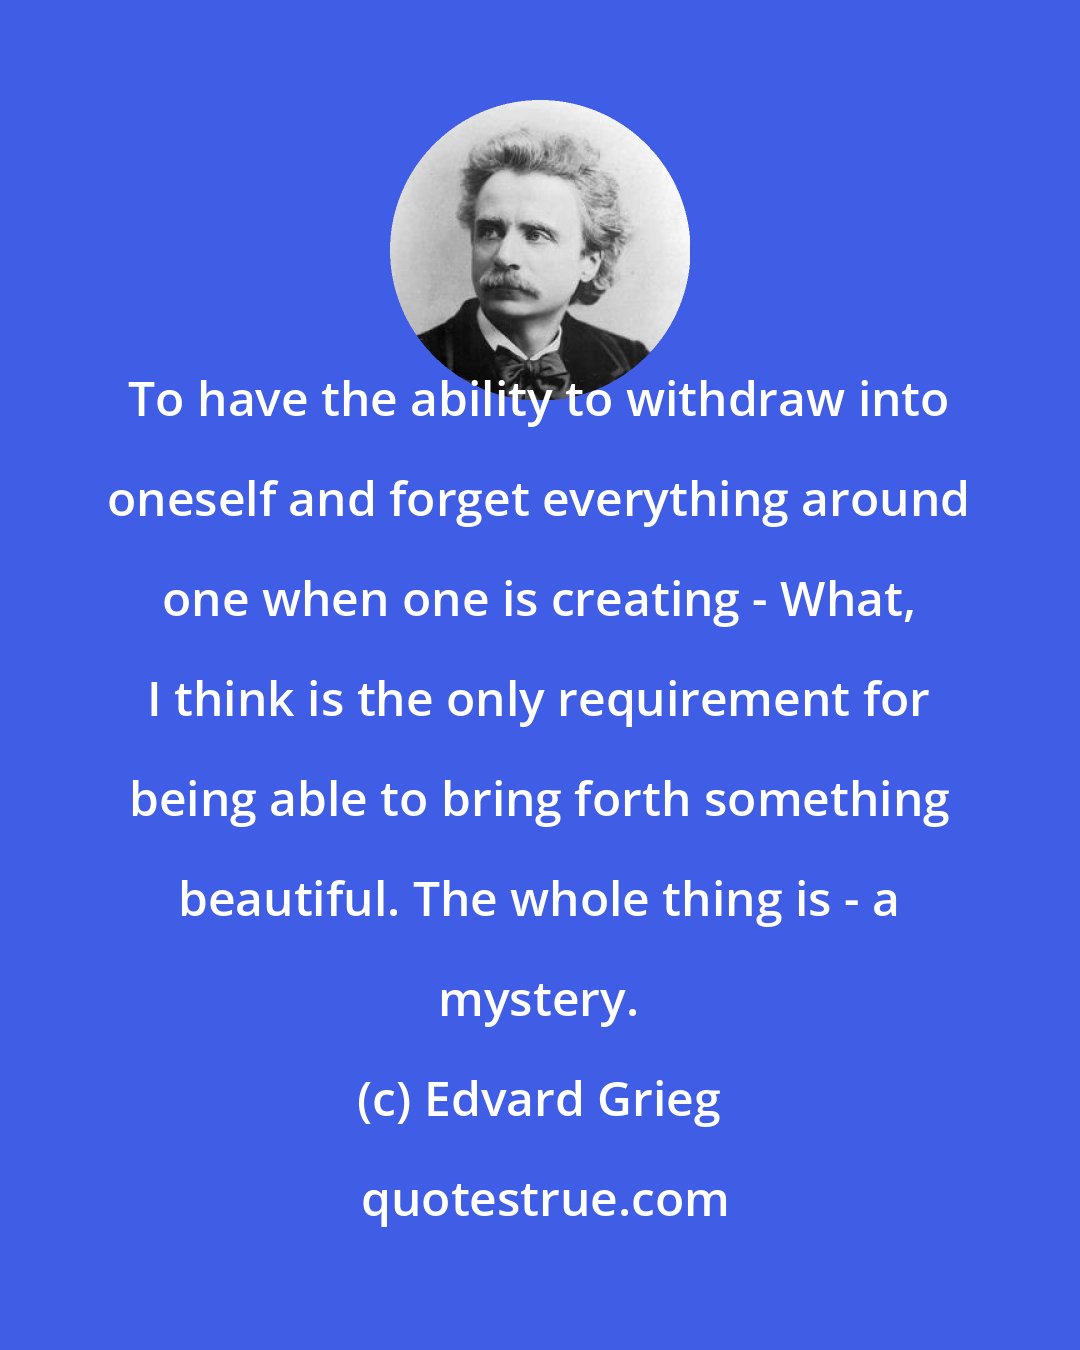 Edvard Grieg: To have the ability to withdraw into oneself and forget everything around one when one is creating - What, I think is the only requirement for being able to bring forth something beautiful. The whole thing is - a mystery.